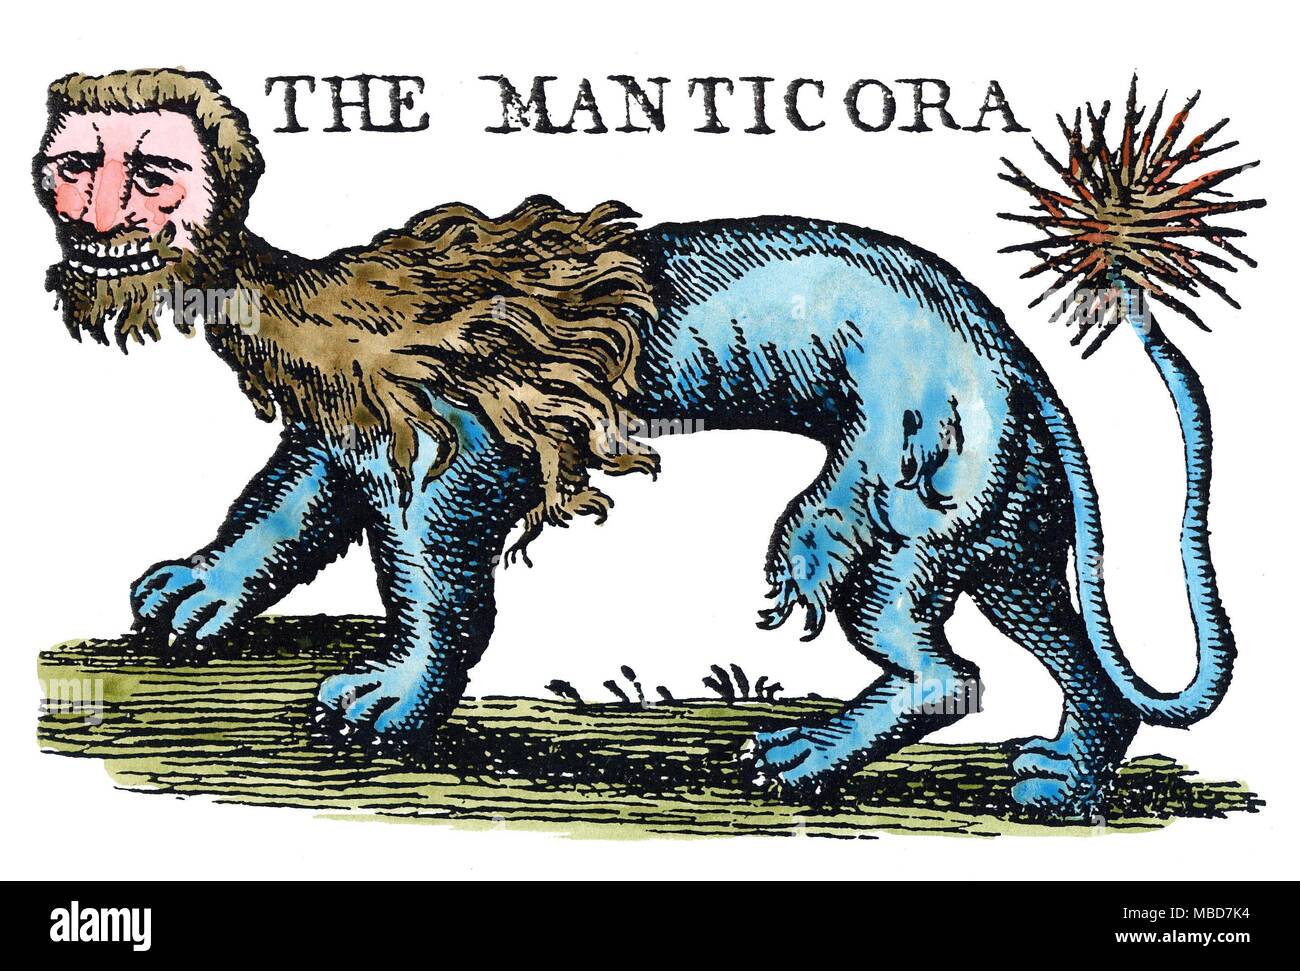 MONSTERS - MANTICORA The human-headed, lion-bodied, spike-tailed Manticora of the ancient travel books. Hand-coloured illustration from the 1886 edition of F. E. Hulme's Myth-Land. Stock Photo